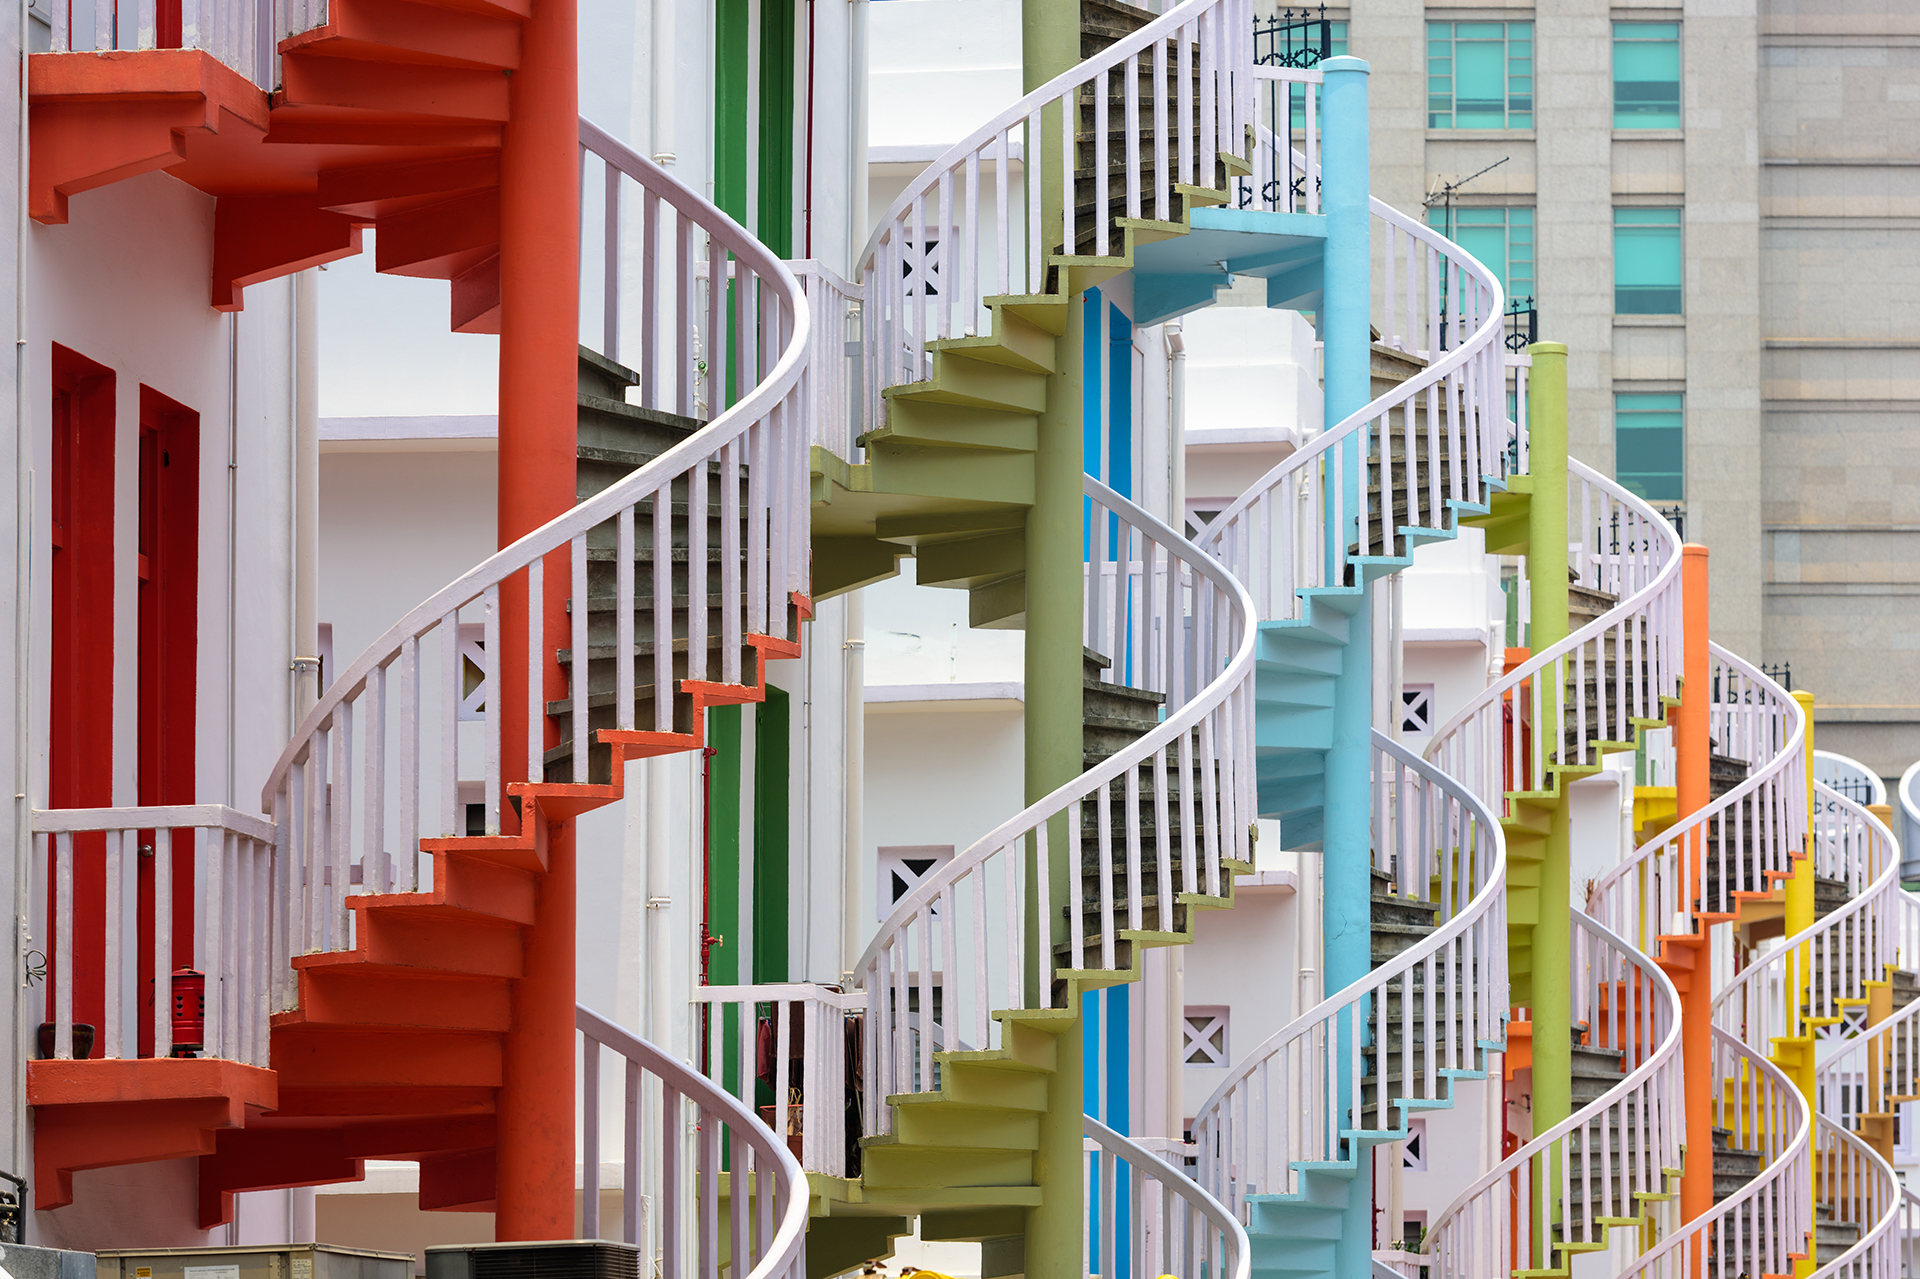 A multicolored set of stairs ascend upwards